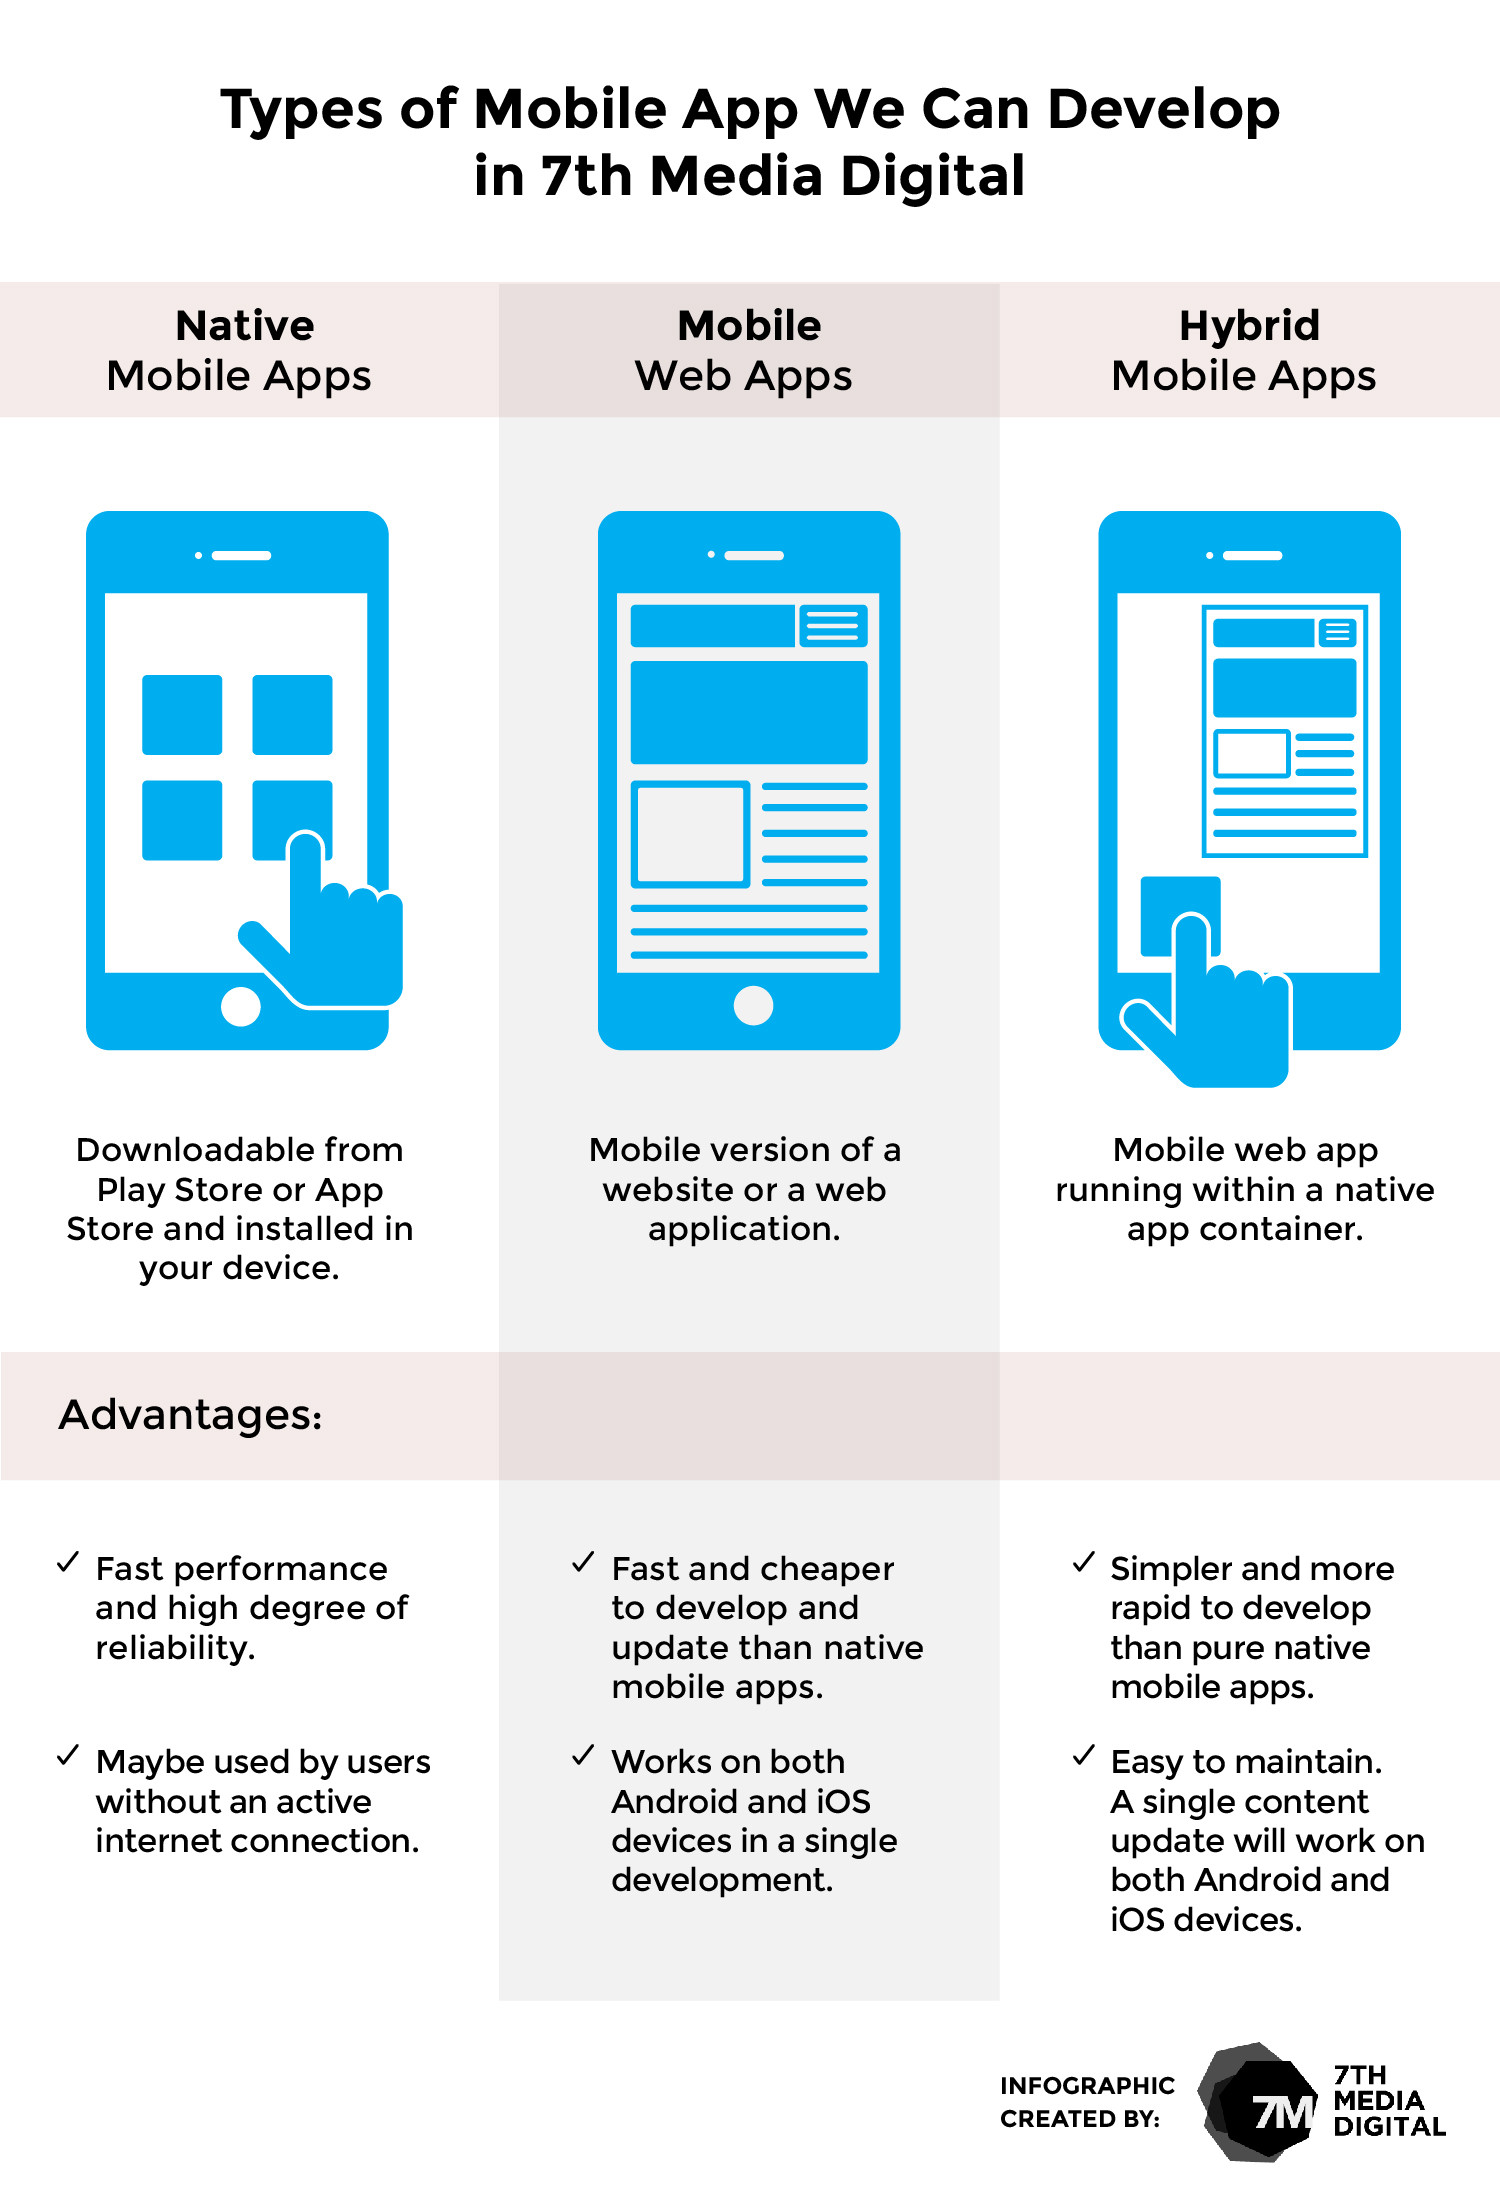 Types of Mobile Applications We Can Develop in 7th Media Digital Infographic